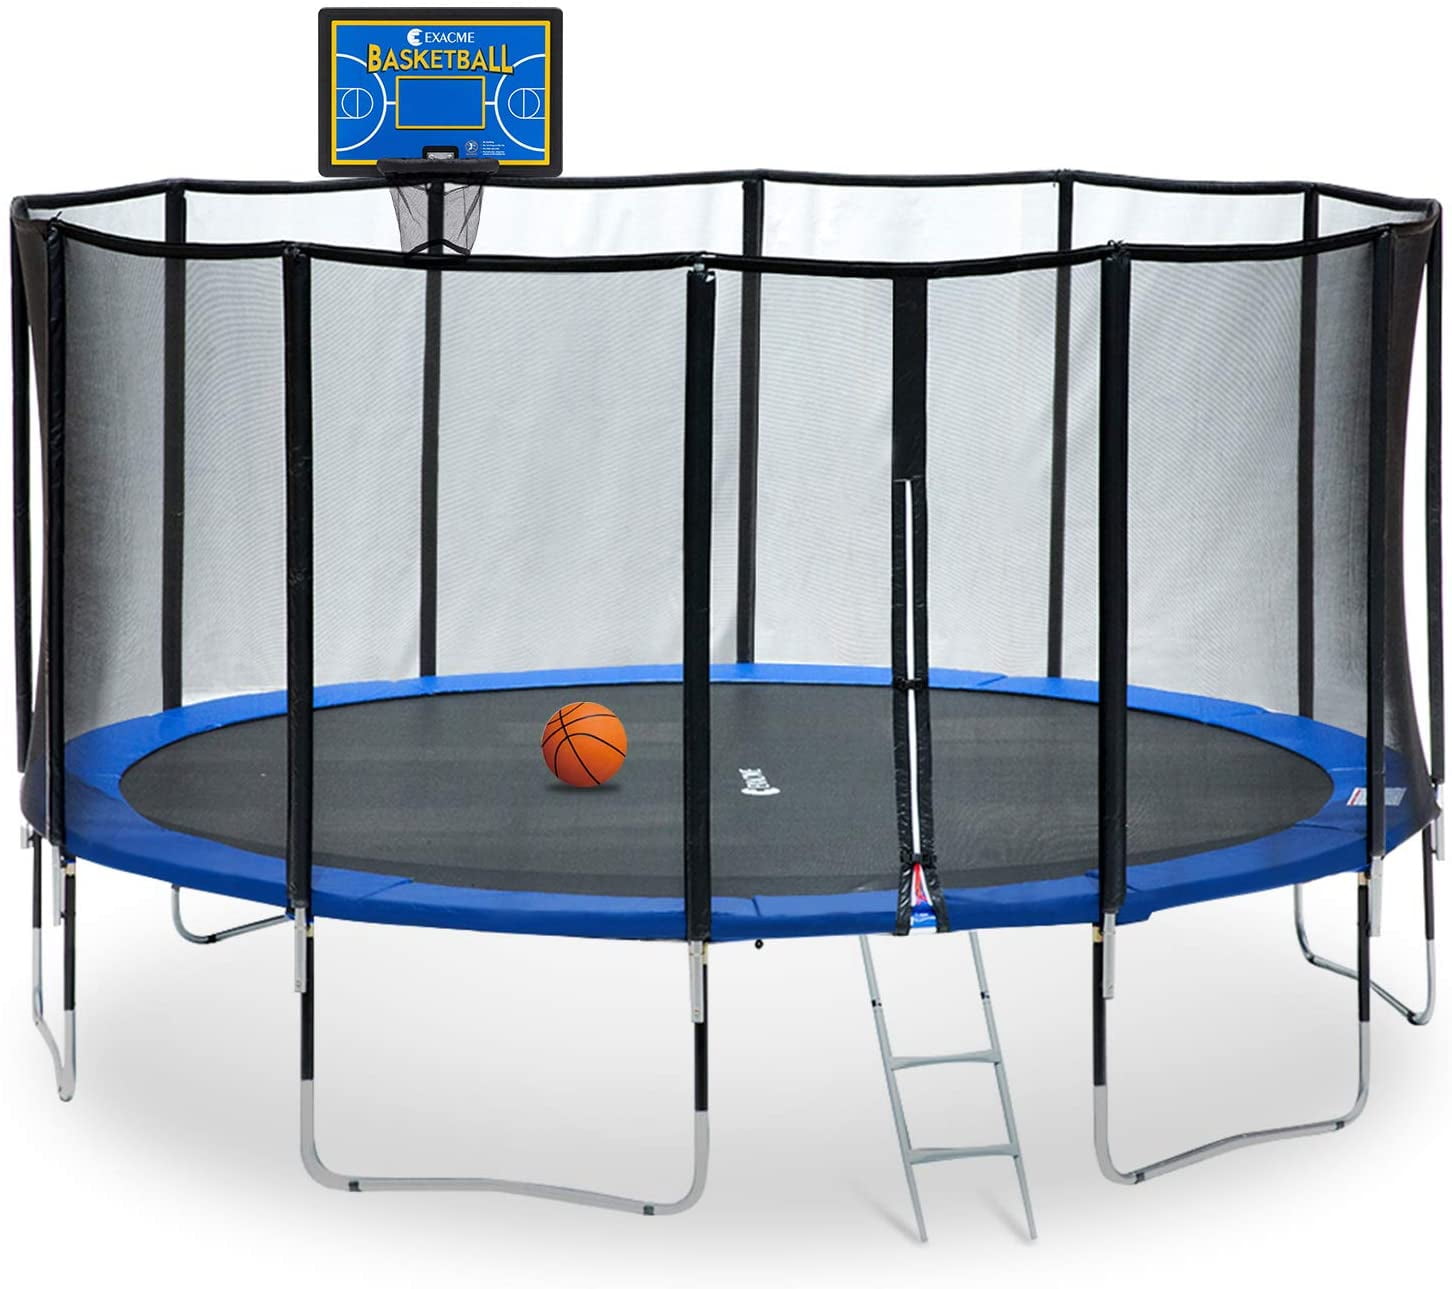 Exacme 15 ft Round Trampoline with Blue Basketball Hoop, L15+BH07BL